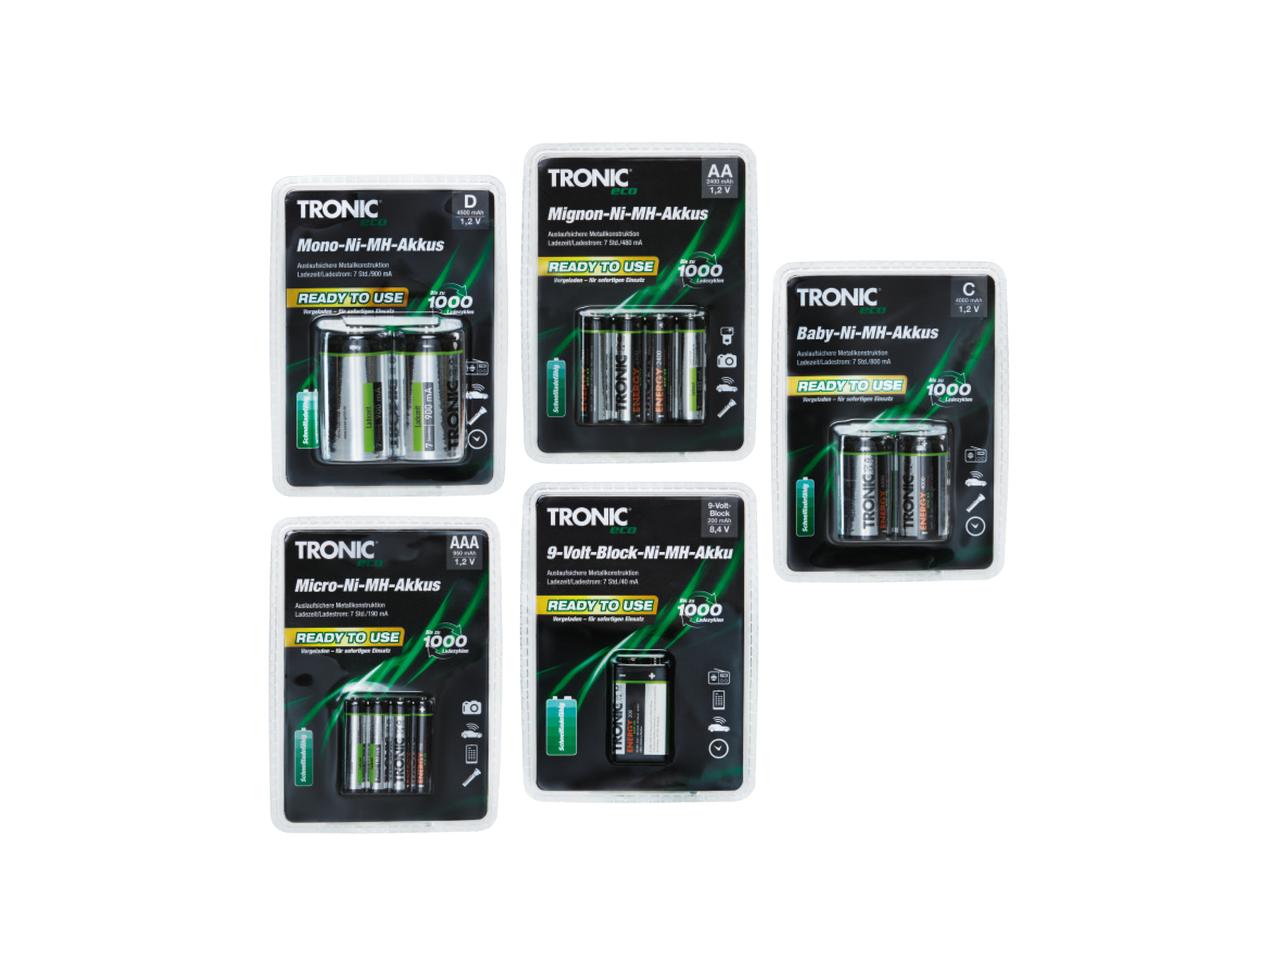 TRONIC AA Ni-MH Rechargeable Batteries